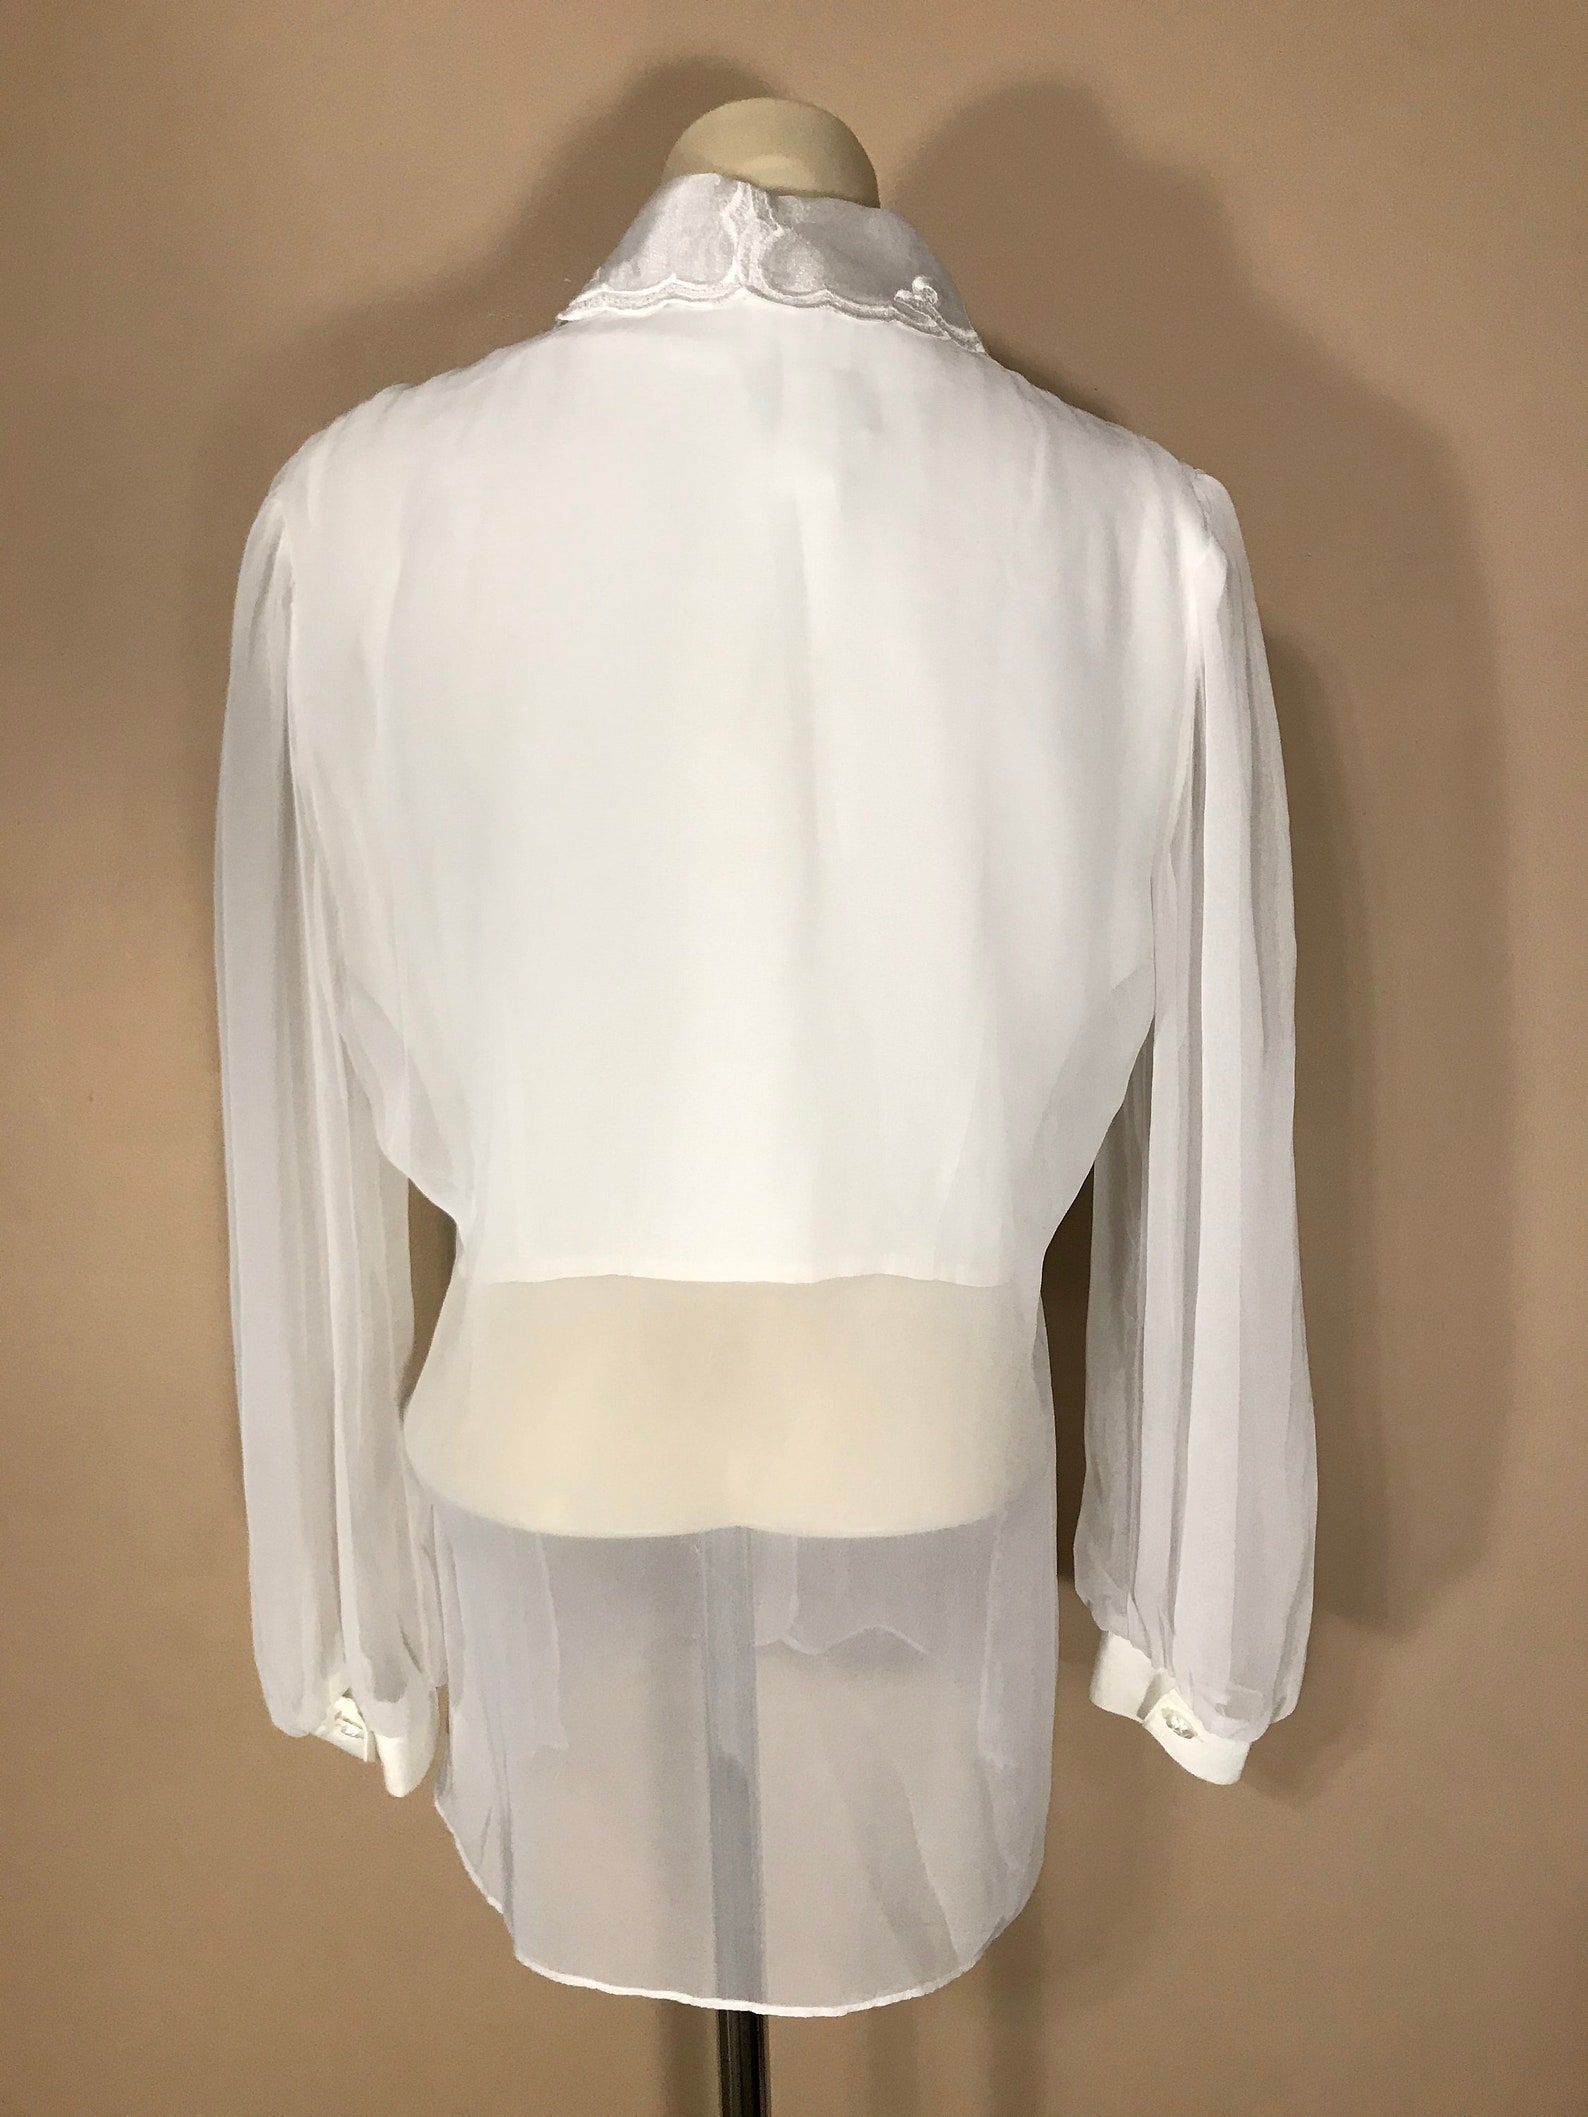 42Bust White Chiffon Crop Blouse with Sheer bottom & | Etsy